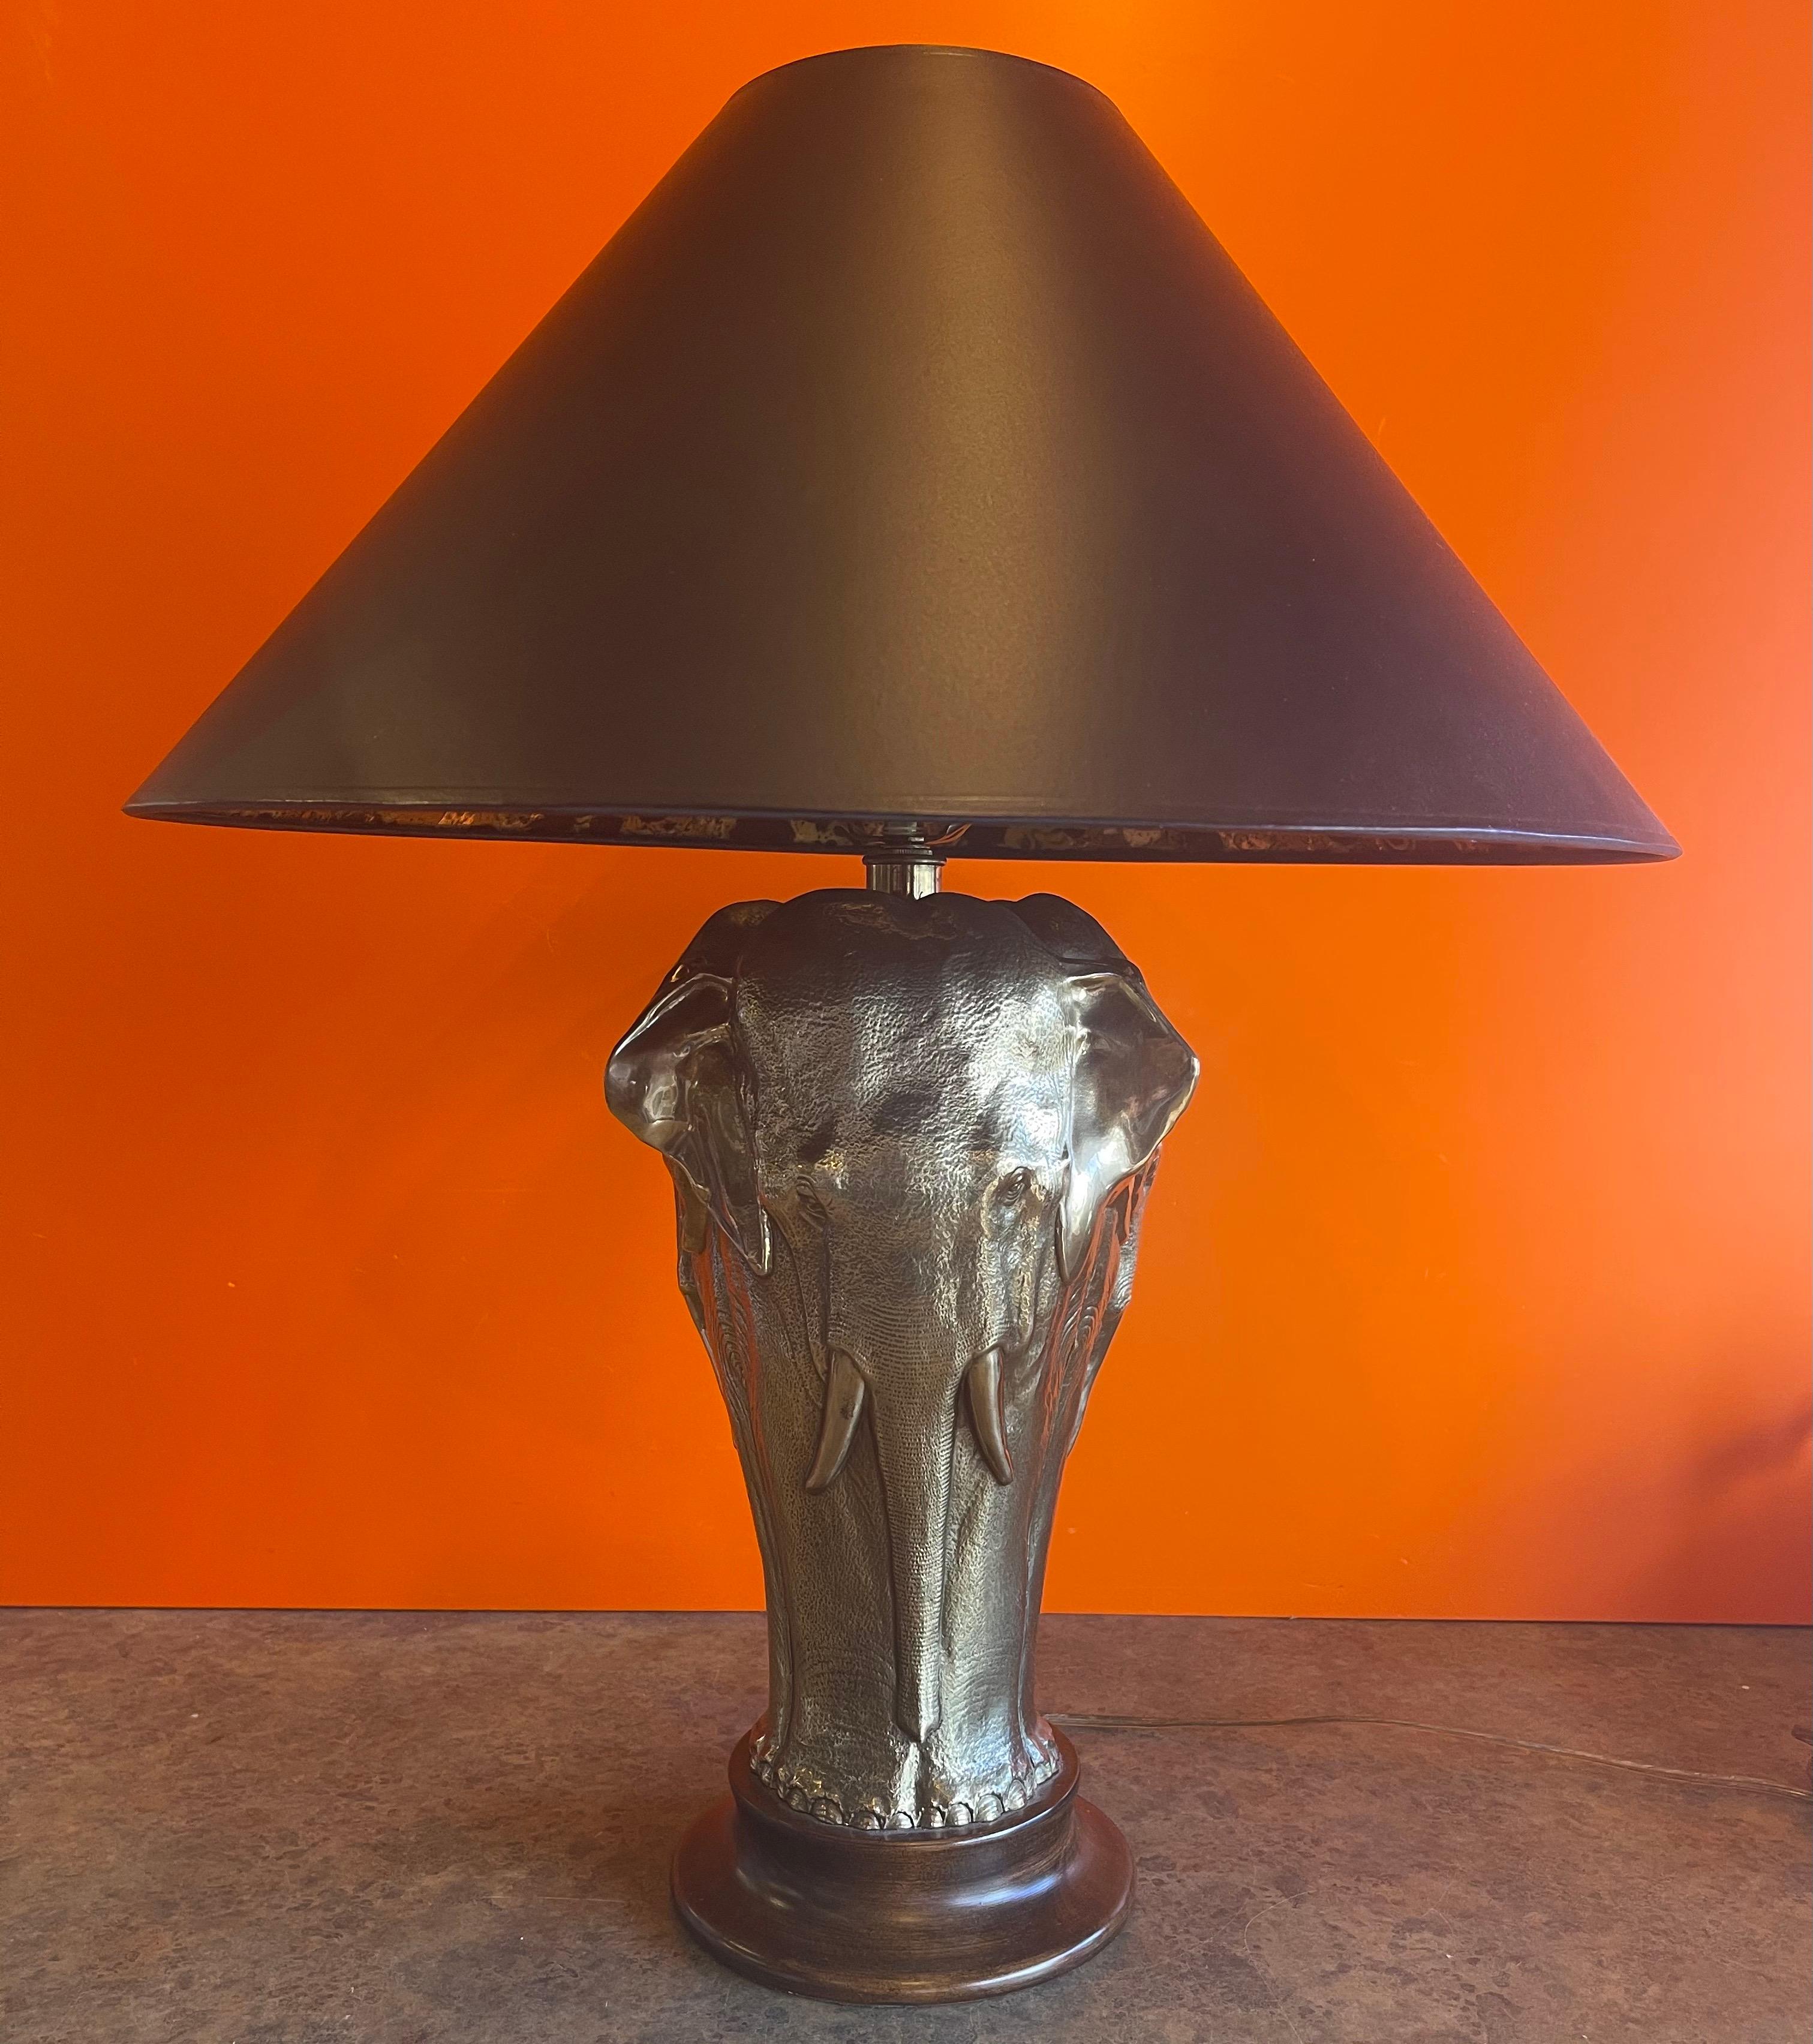 Gorgeous sculptural brass elephant table lamp on round wood base by Tyndale for Frederick Cooper Lamp Co. of Chicago, circa 1970s. The lamp features a brass elephant repeated equally around wood base with the original black shade signed 